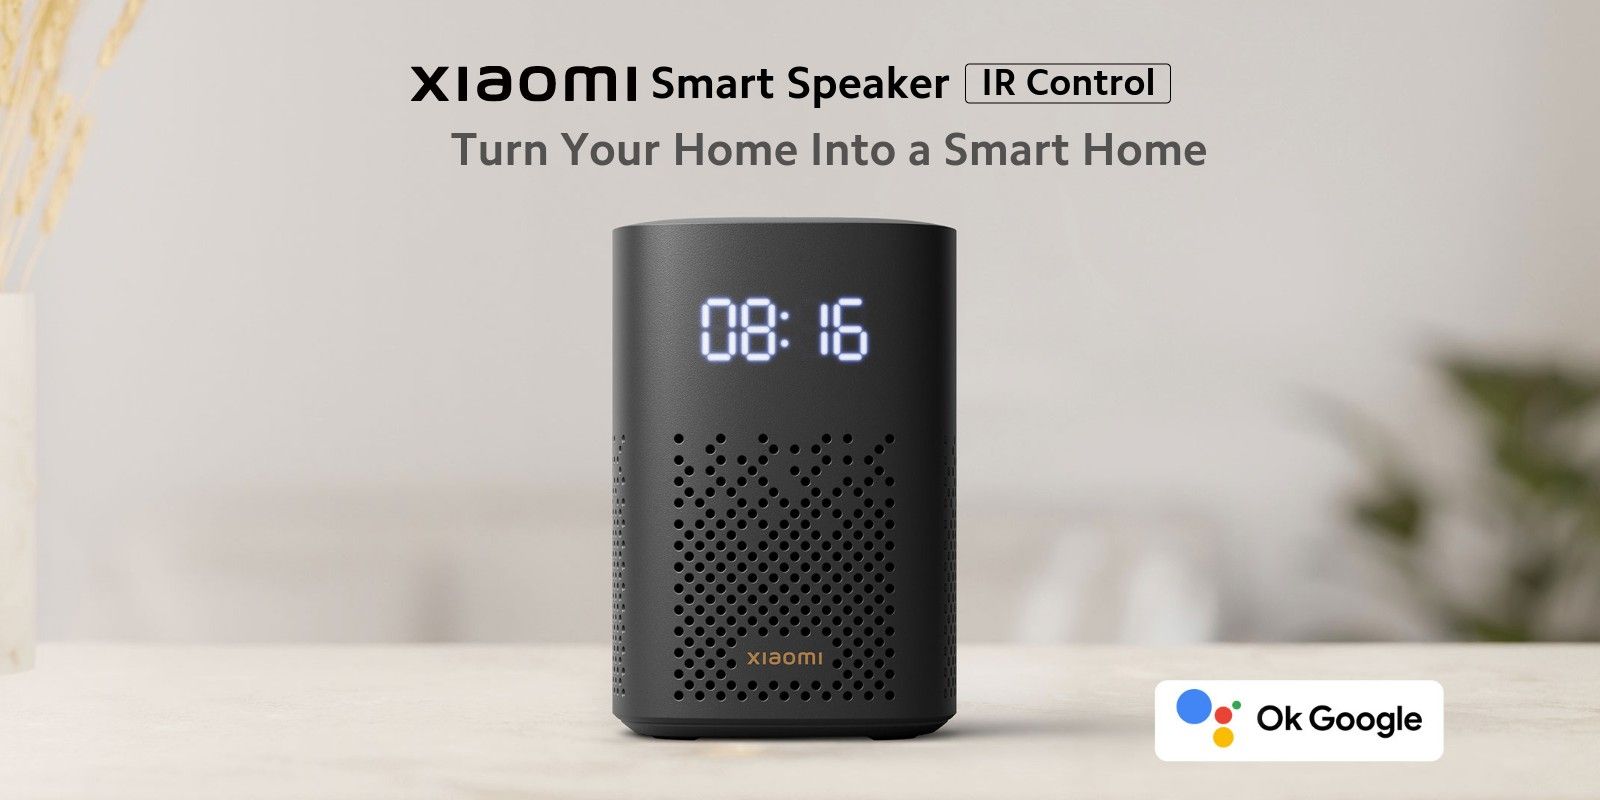 The Xiaomi Smart Speaker IR Control is only sold in India for now